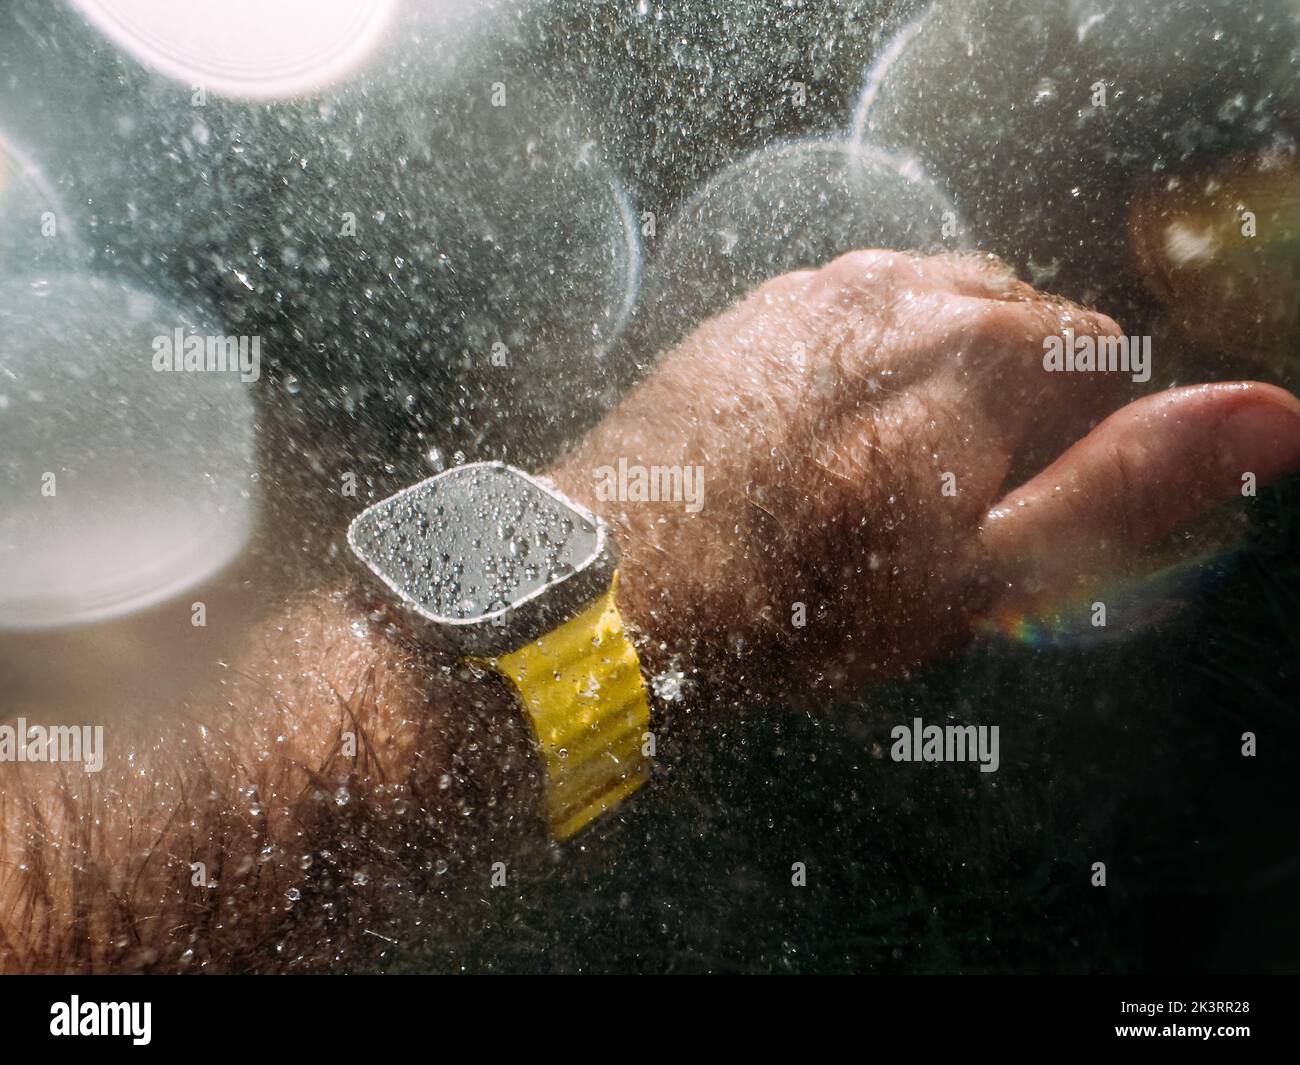 Paris, France - Sep 23, 2022: Male hand underwater diving swimming with new titanium Apple Watch Ultra designed for extreme activities like endurance sports, elite athletes, trailblazing, adventure Stock Photo